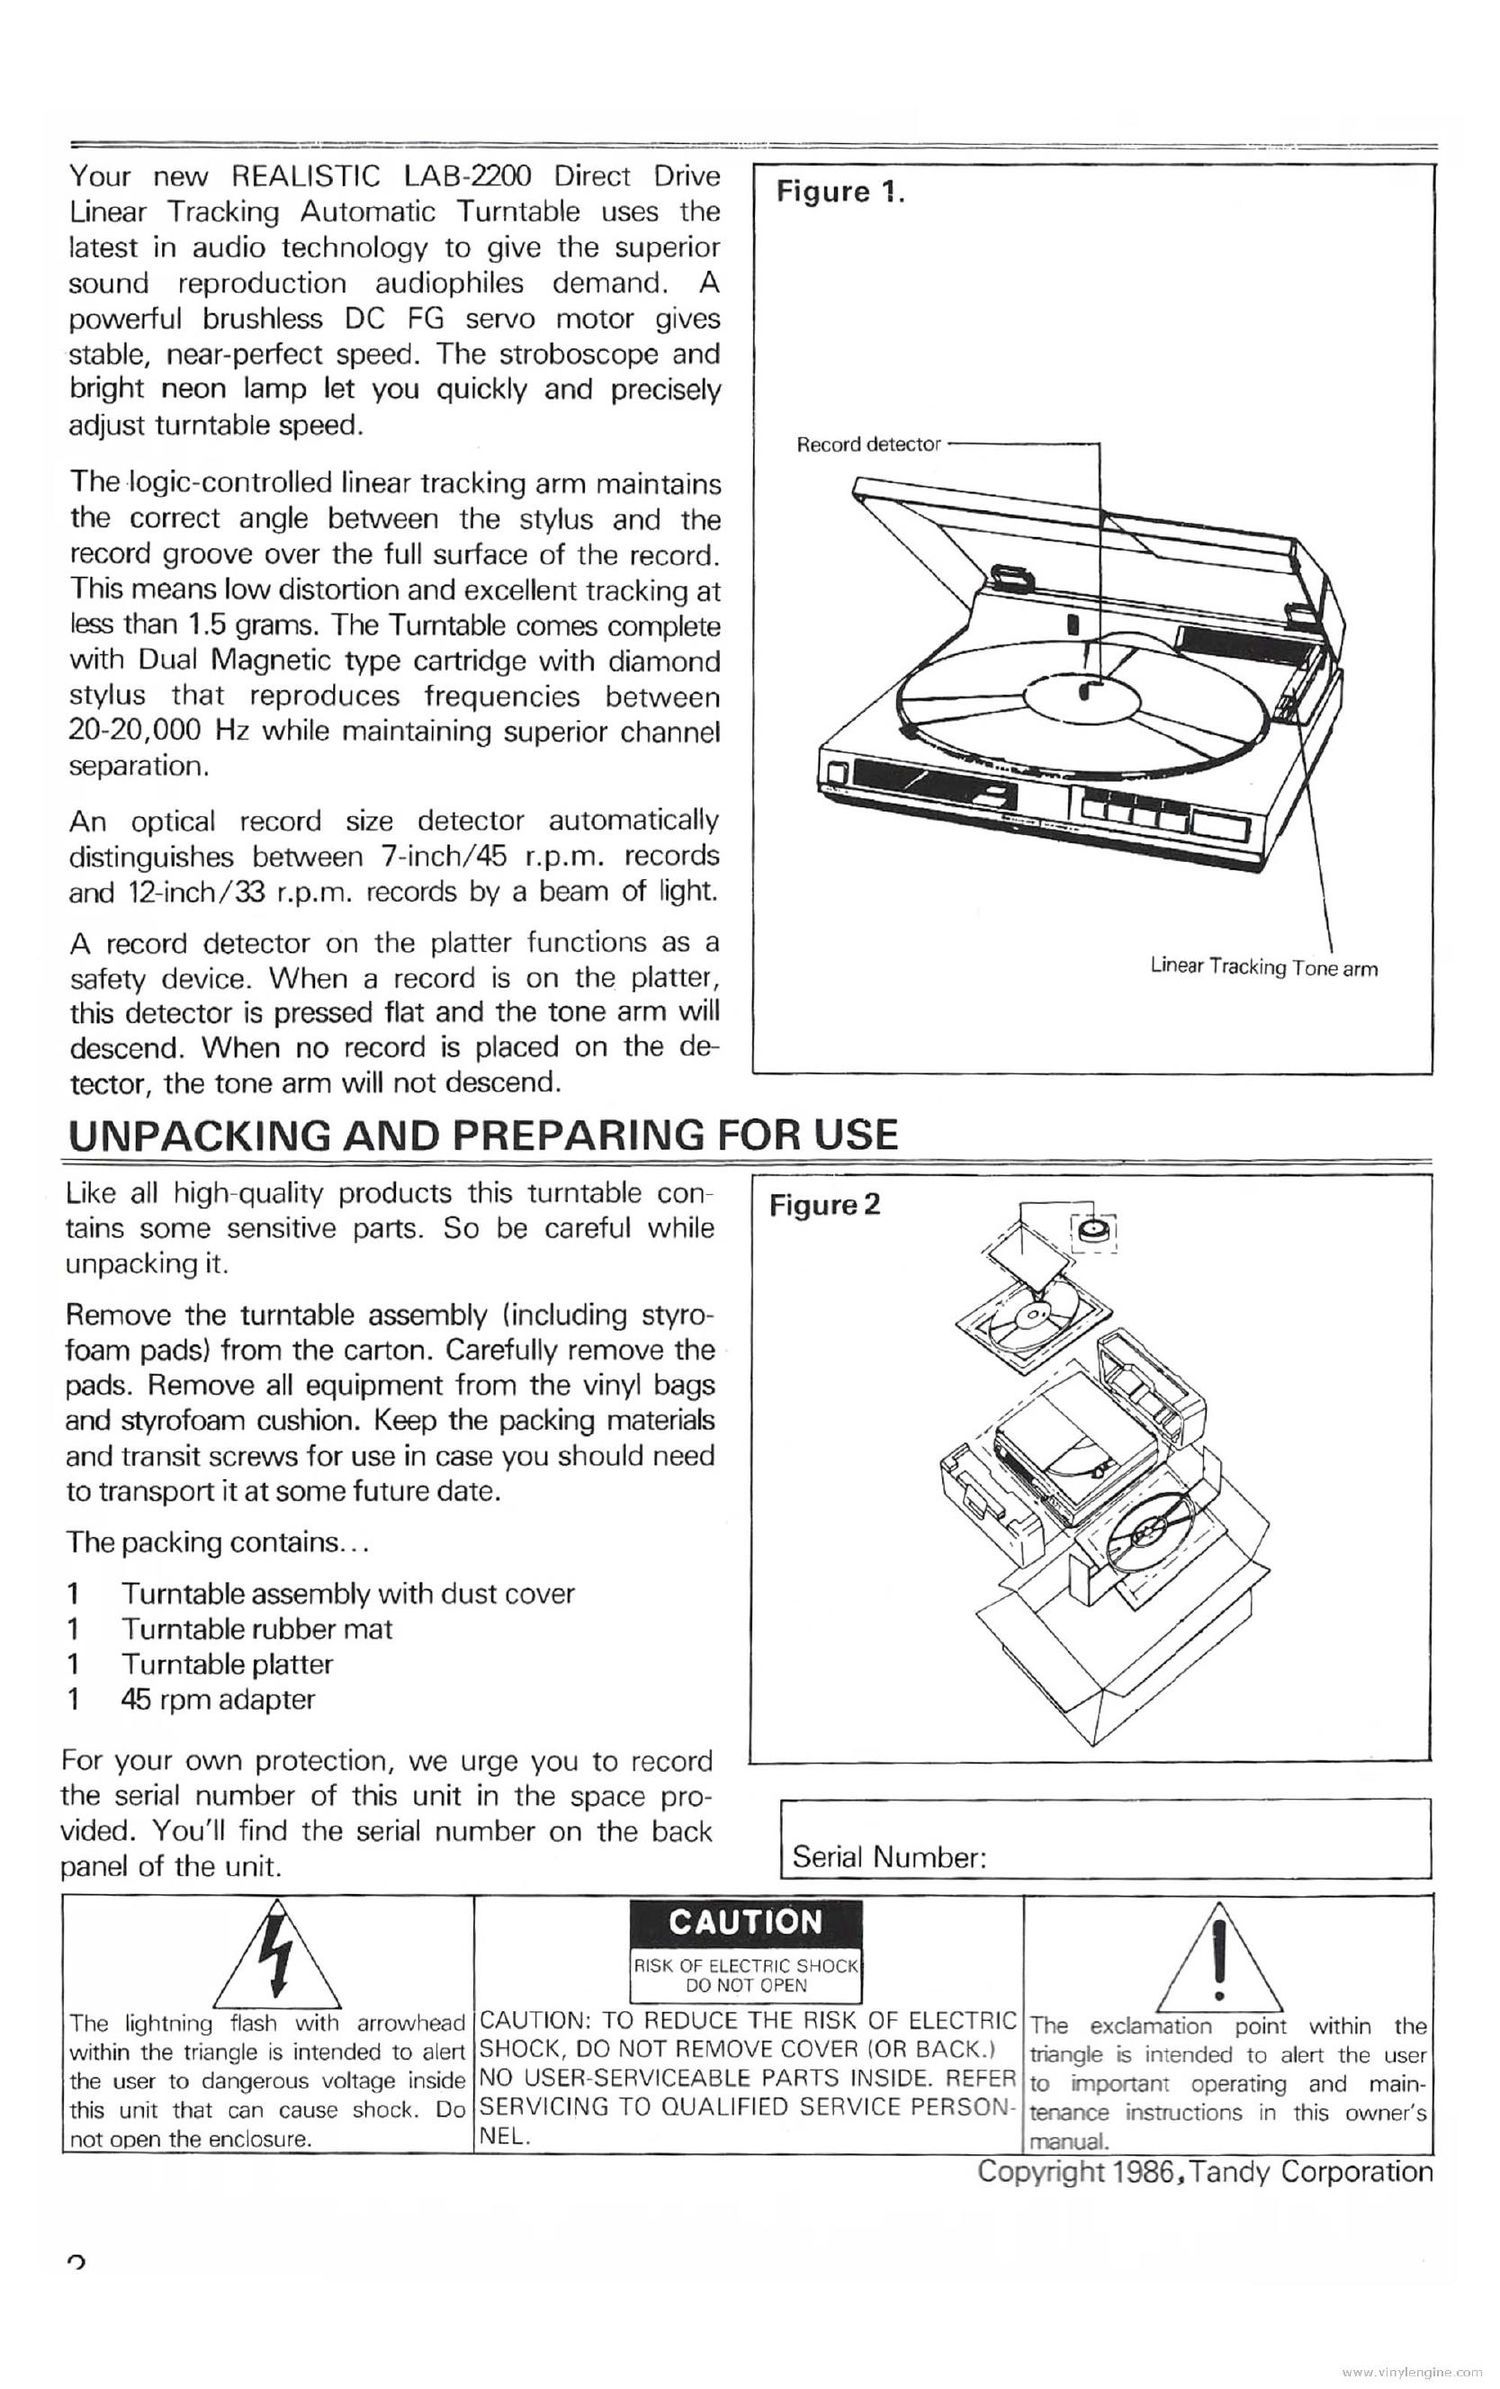 realistic lab 2200 owners manual